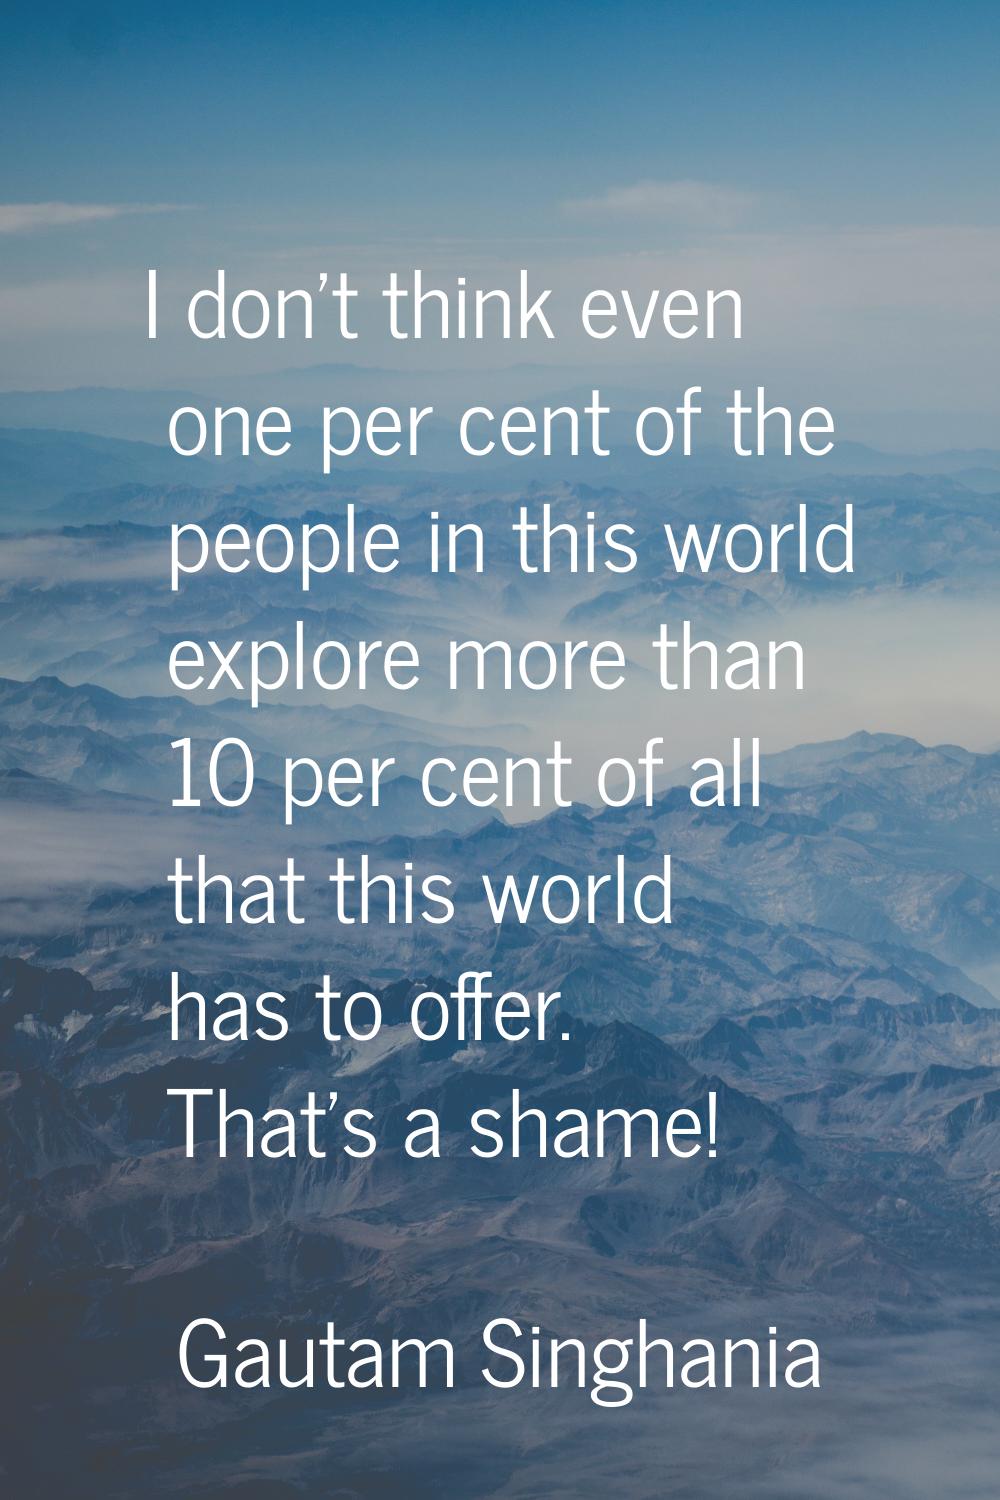 I don't think even one per cent of the people in this world explore more than 10 per cent of all th